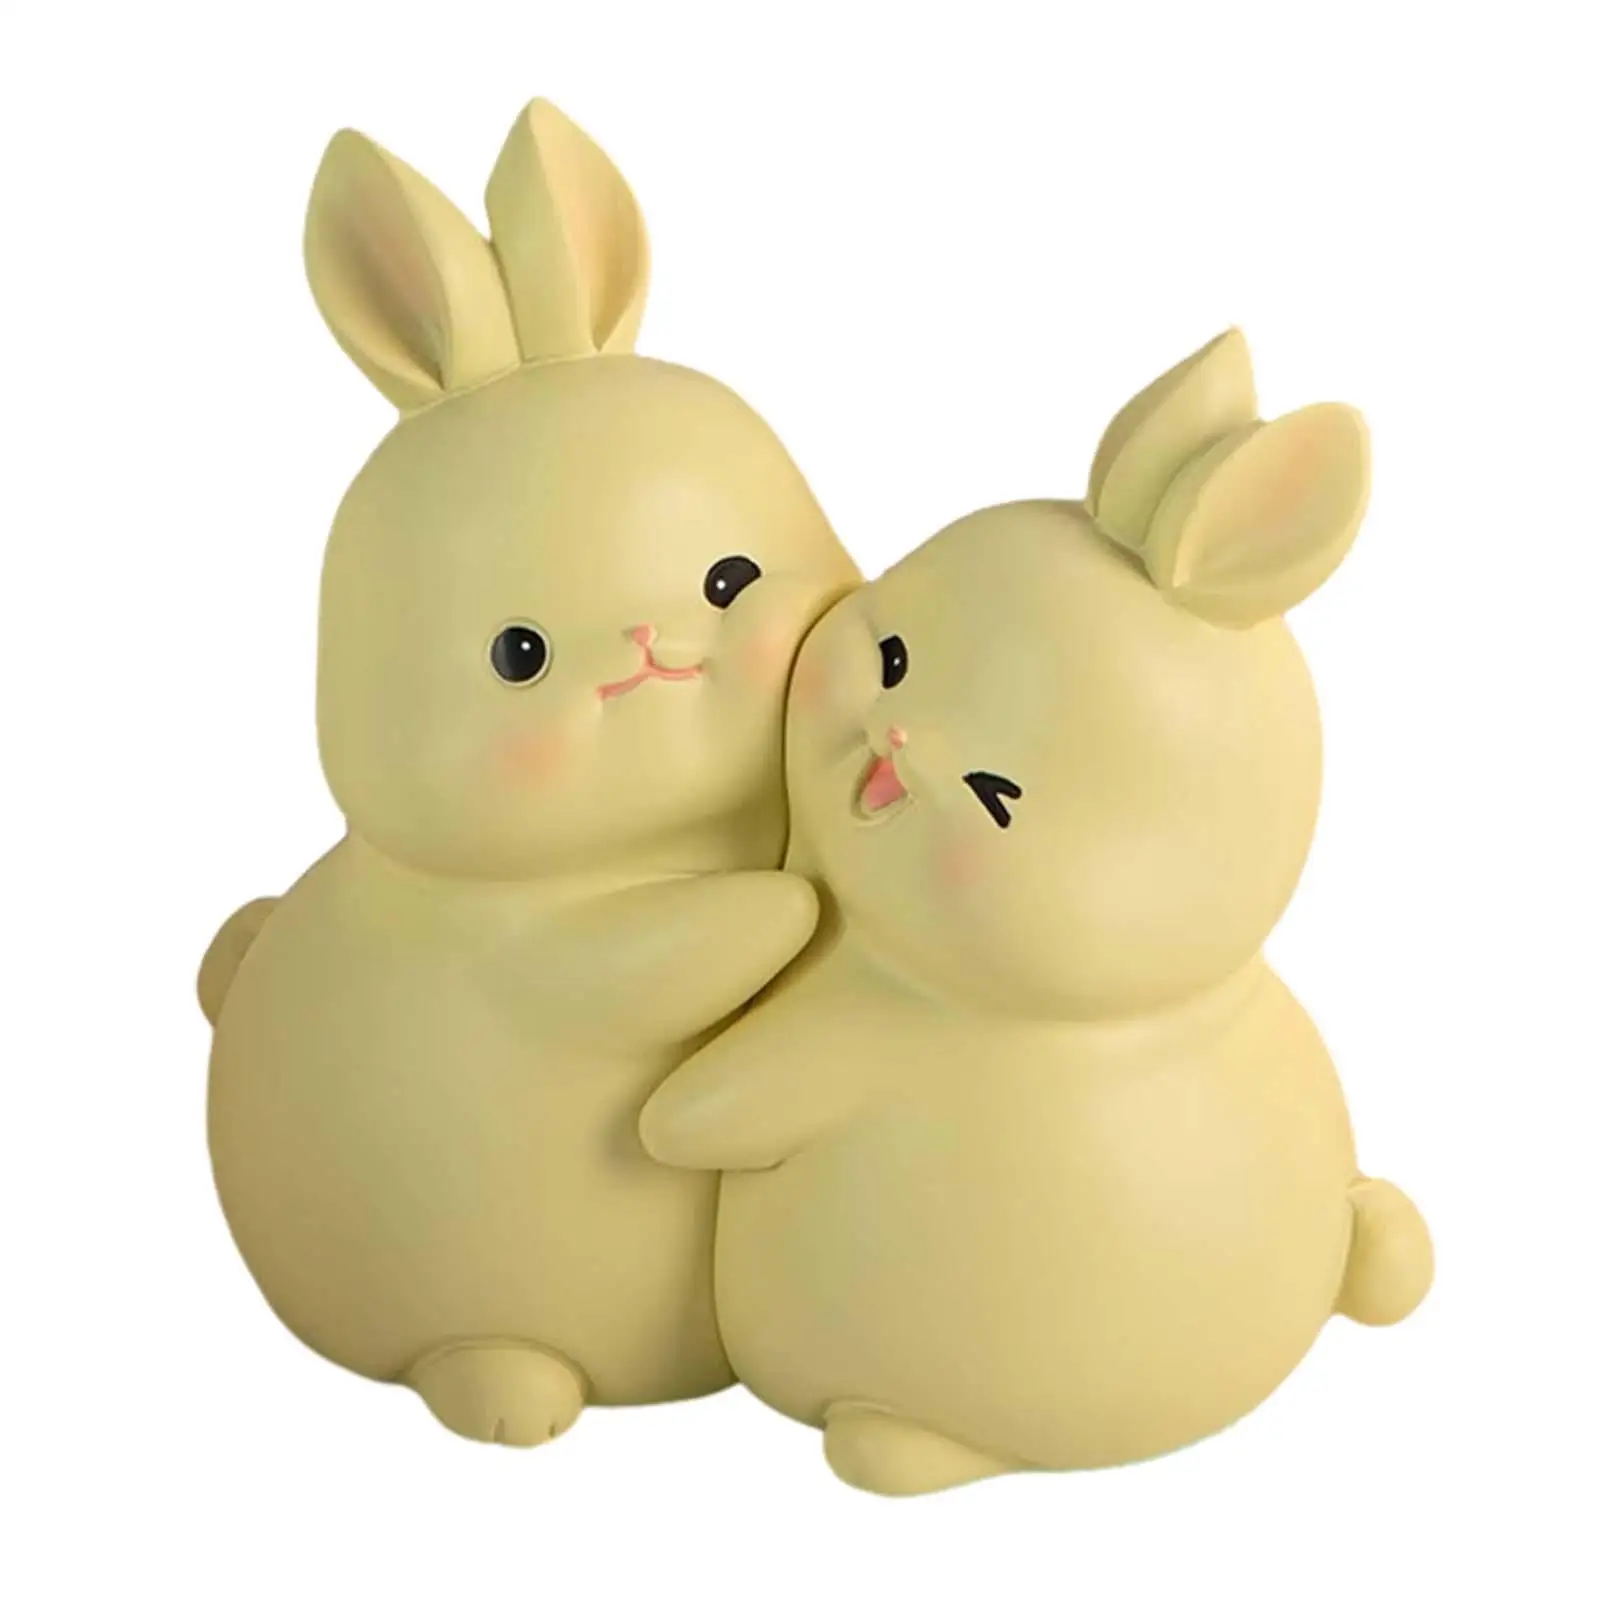 Rabbit Bookends Cute Bunny Book Ends Stopper Resin Animal Figurines Book Ends to Hold Books for Shelves Office Cabinet Desk Home